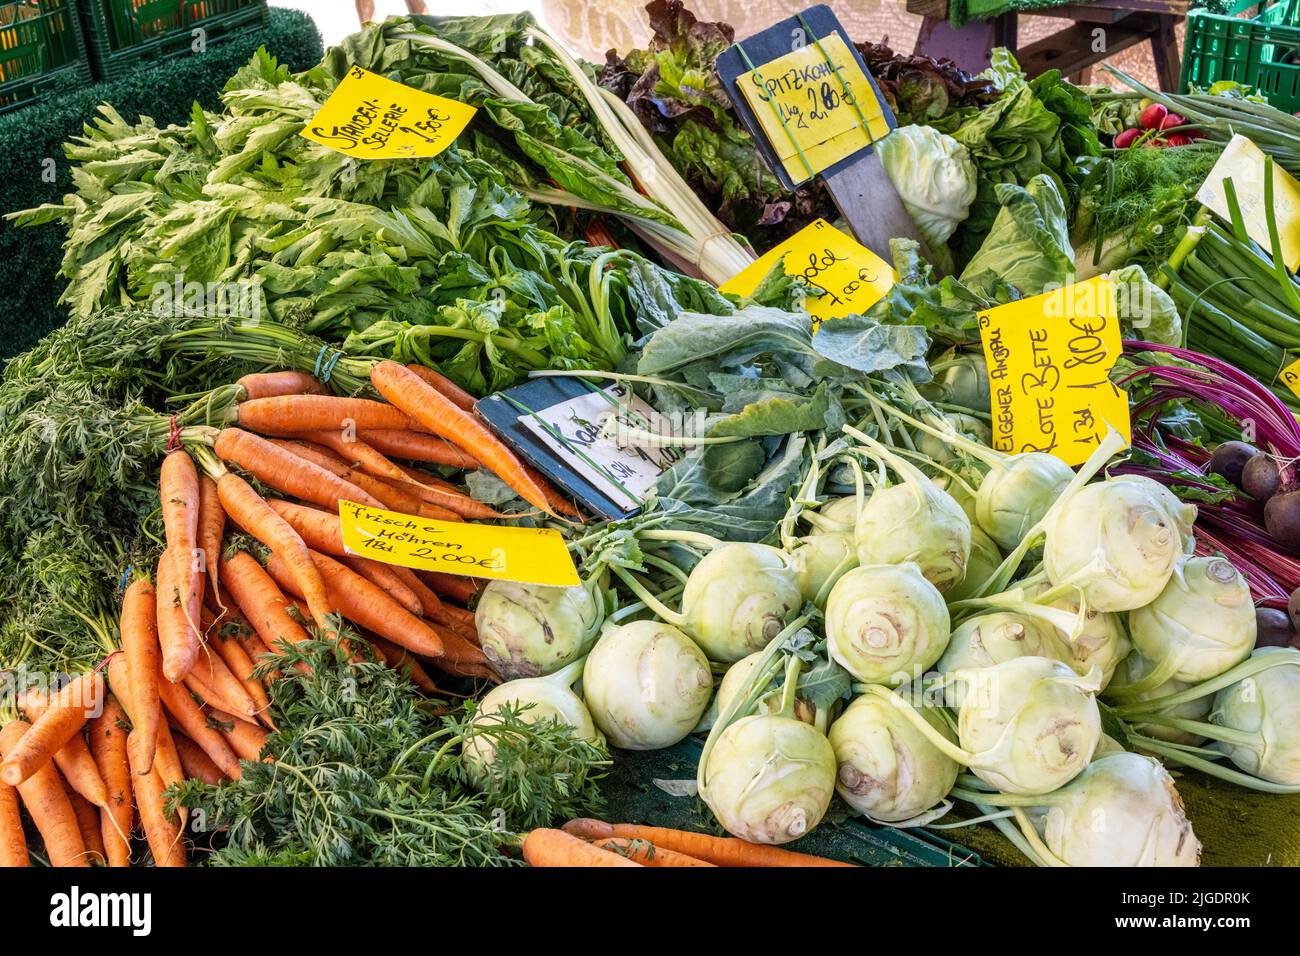 Kohlrabi, carrots and other vegetables for sale at a market Stock Photo